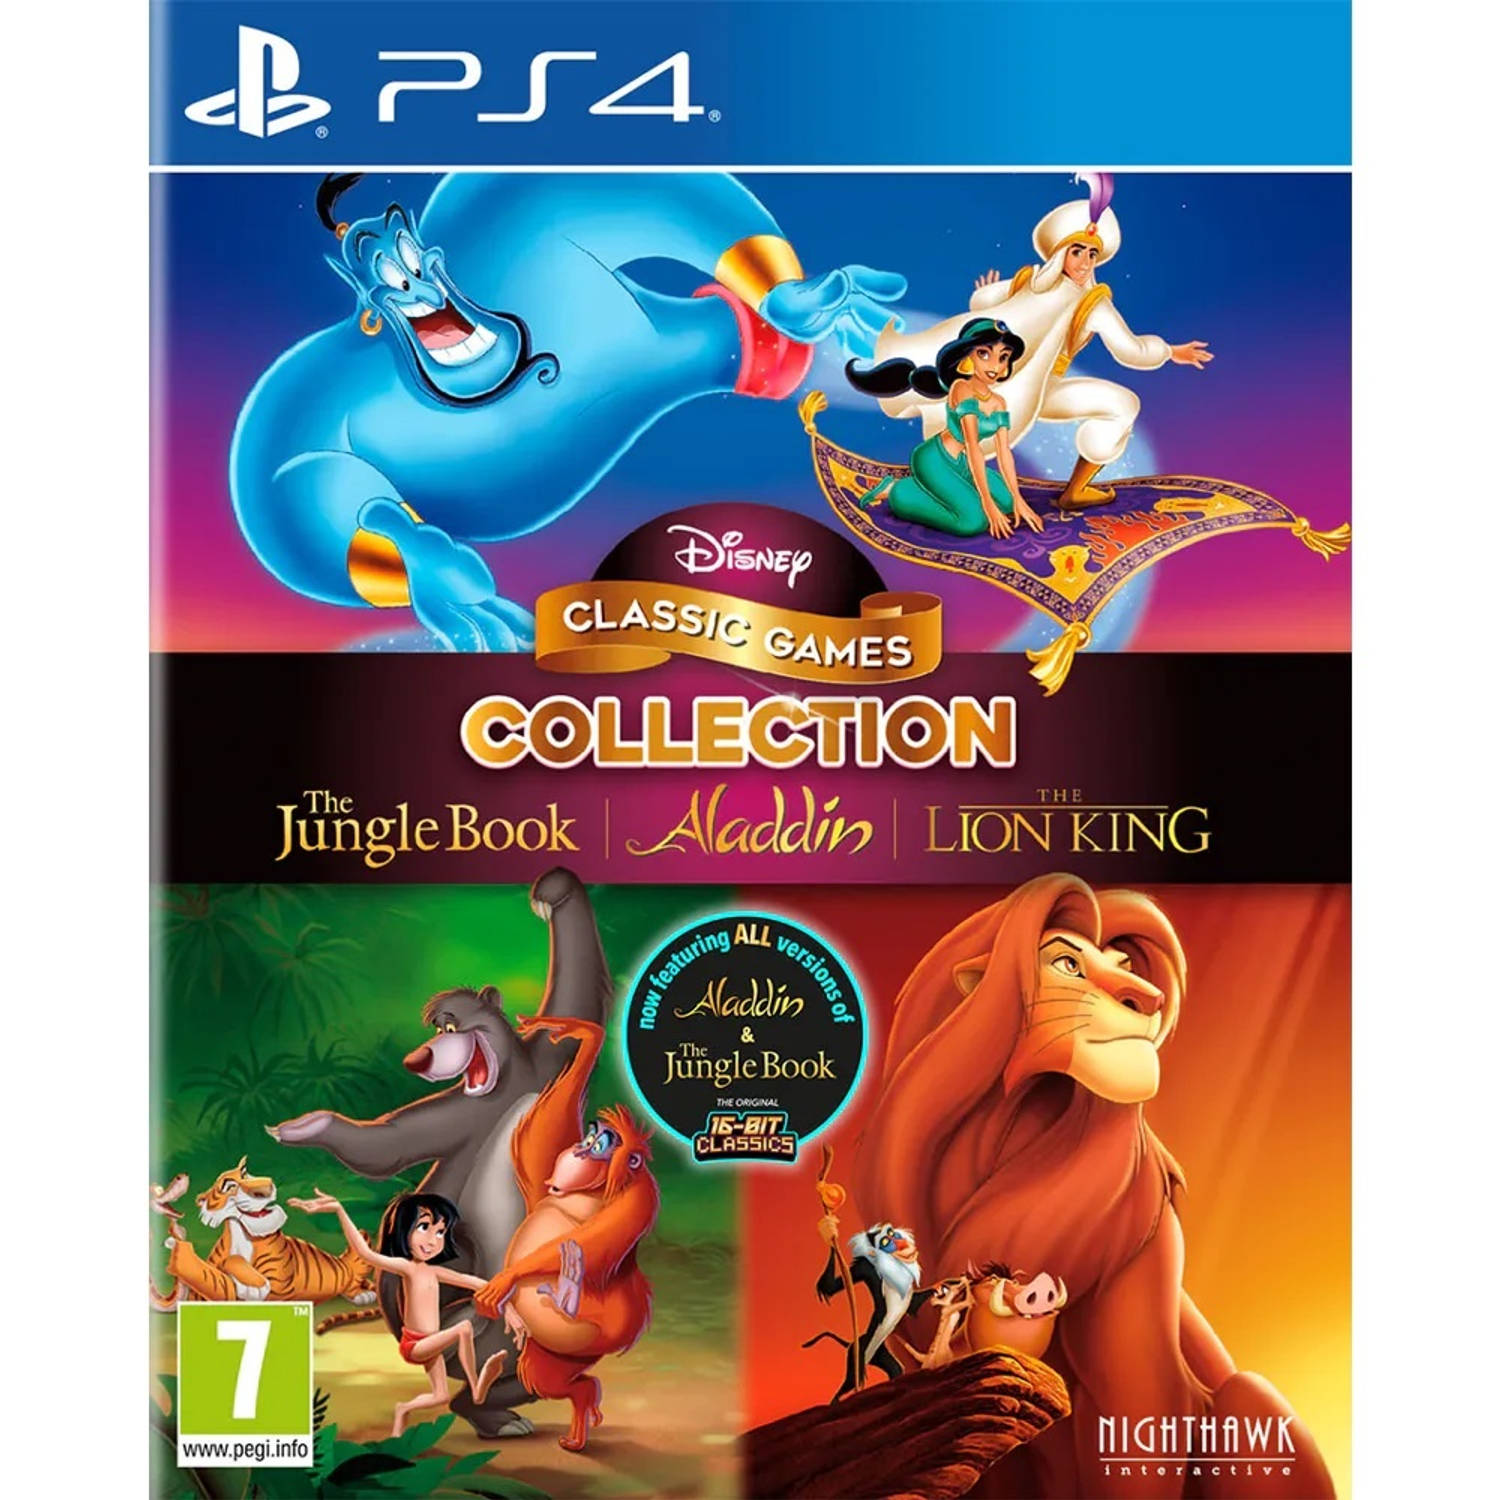 Disney Classic Games Collection: The Jungle Book, Aladdin, The Lion King - PS4